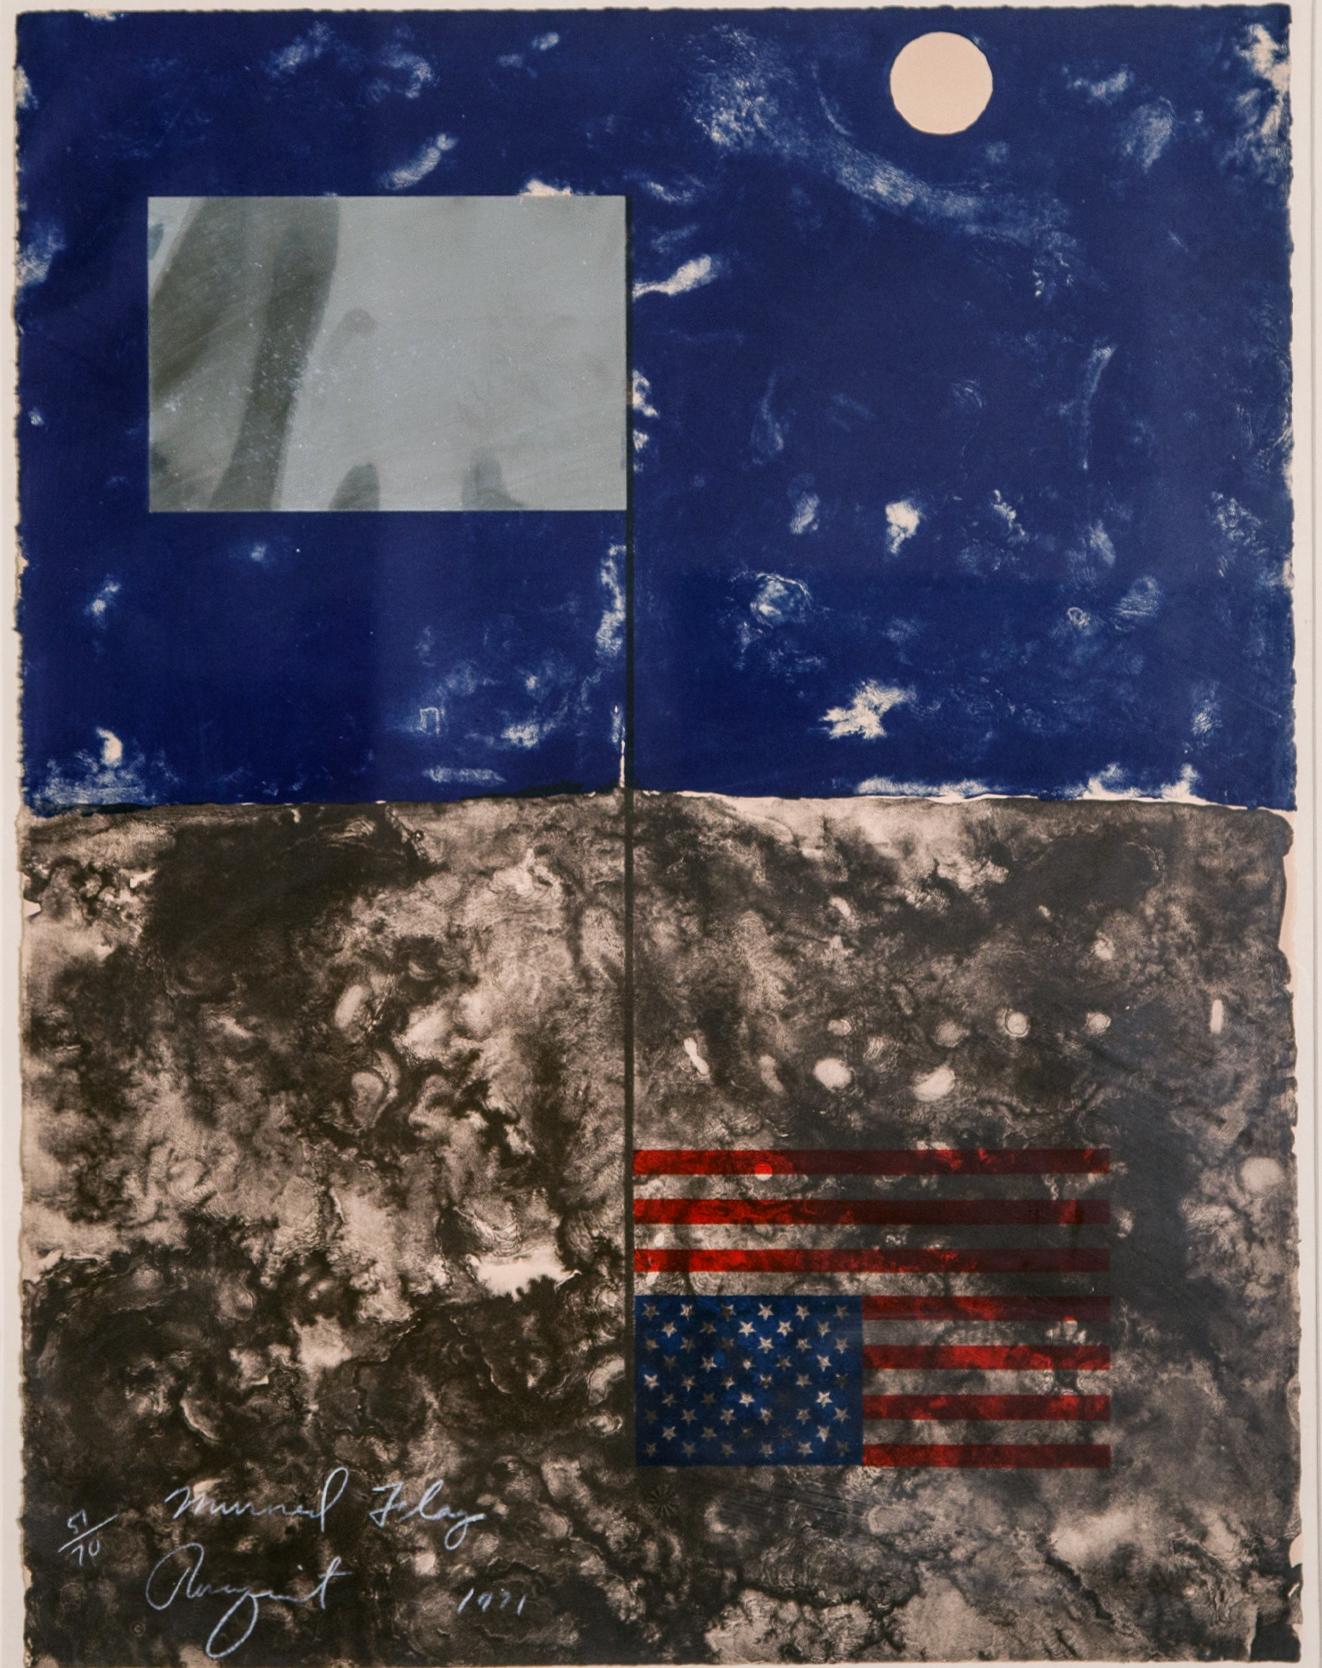 James Rosenquist Abstract Print - Mirrored Flag from Cold Light Series